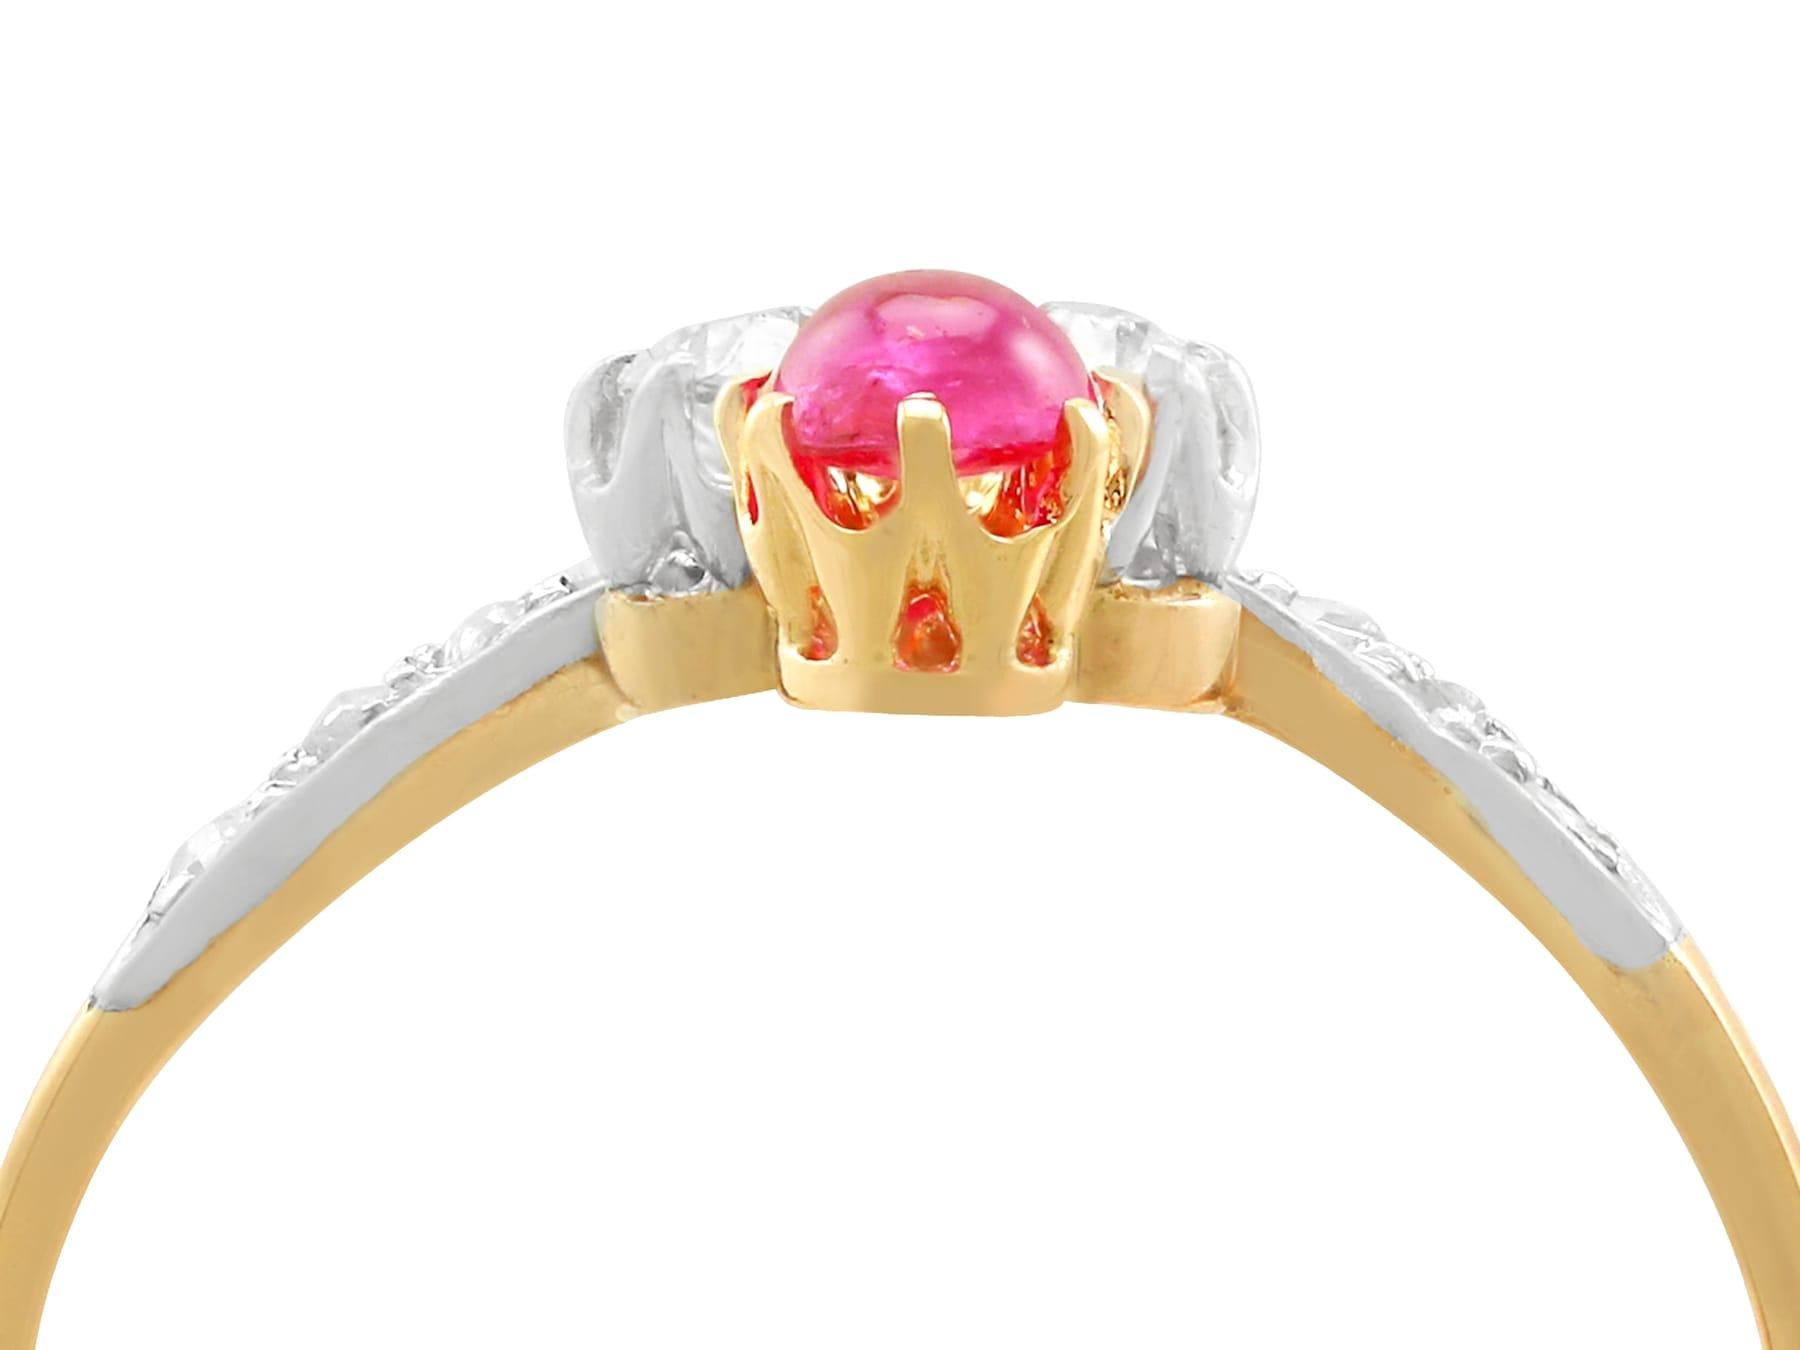 An impressive Victorian 0.32 carat pink ruby and 0.36 carat diamond, 15 karat yellow gold and platinum set dress ring; part of our diverse antique jewelry collections.

This fine and impressive ruby and diamond dress ring has been crafted in 15k